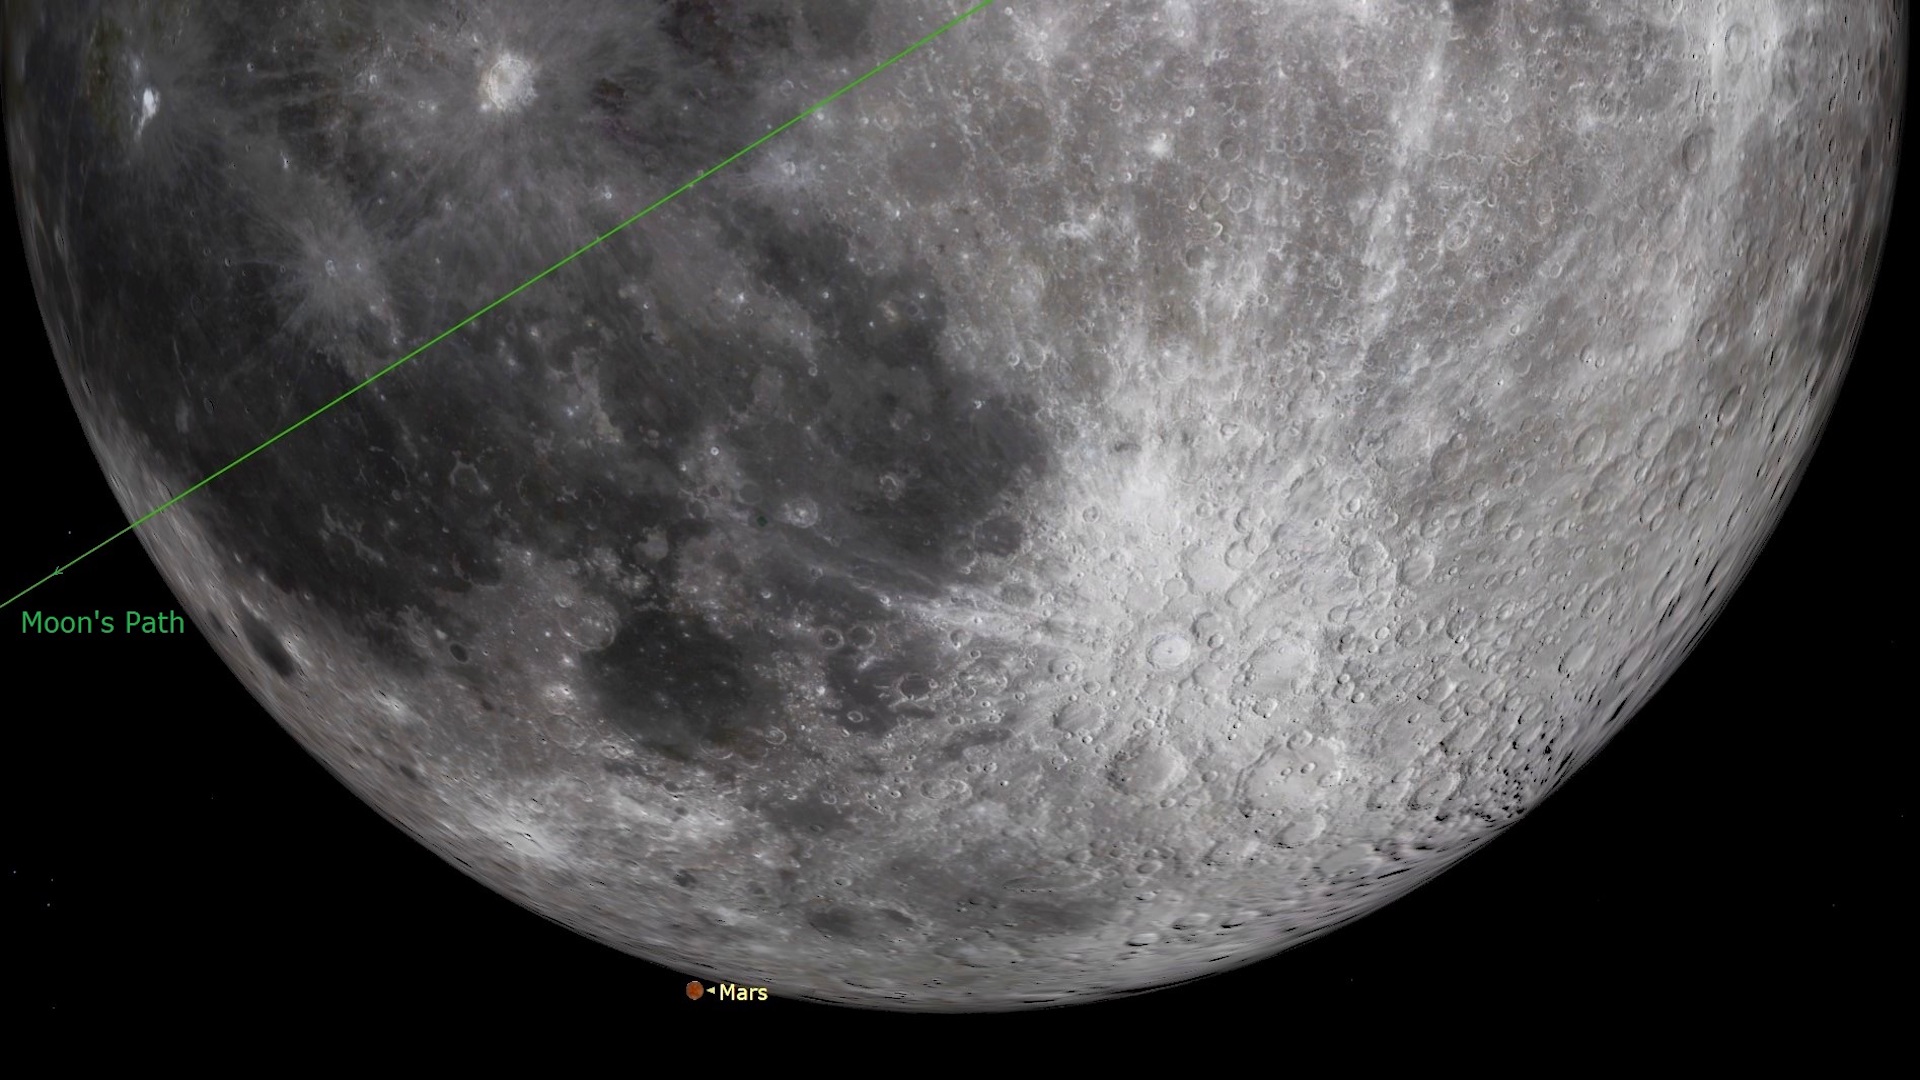 An illustration of the full Cold Moon as it will appear on December 7, with Mars visible behind it.